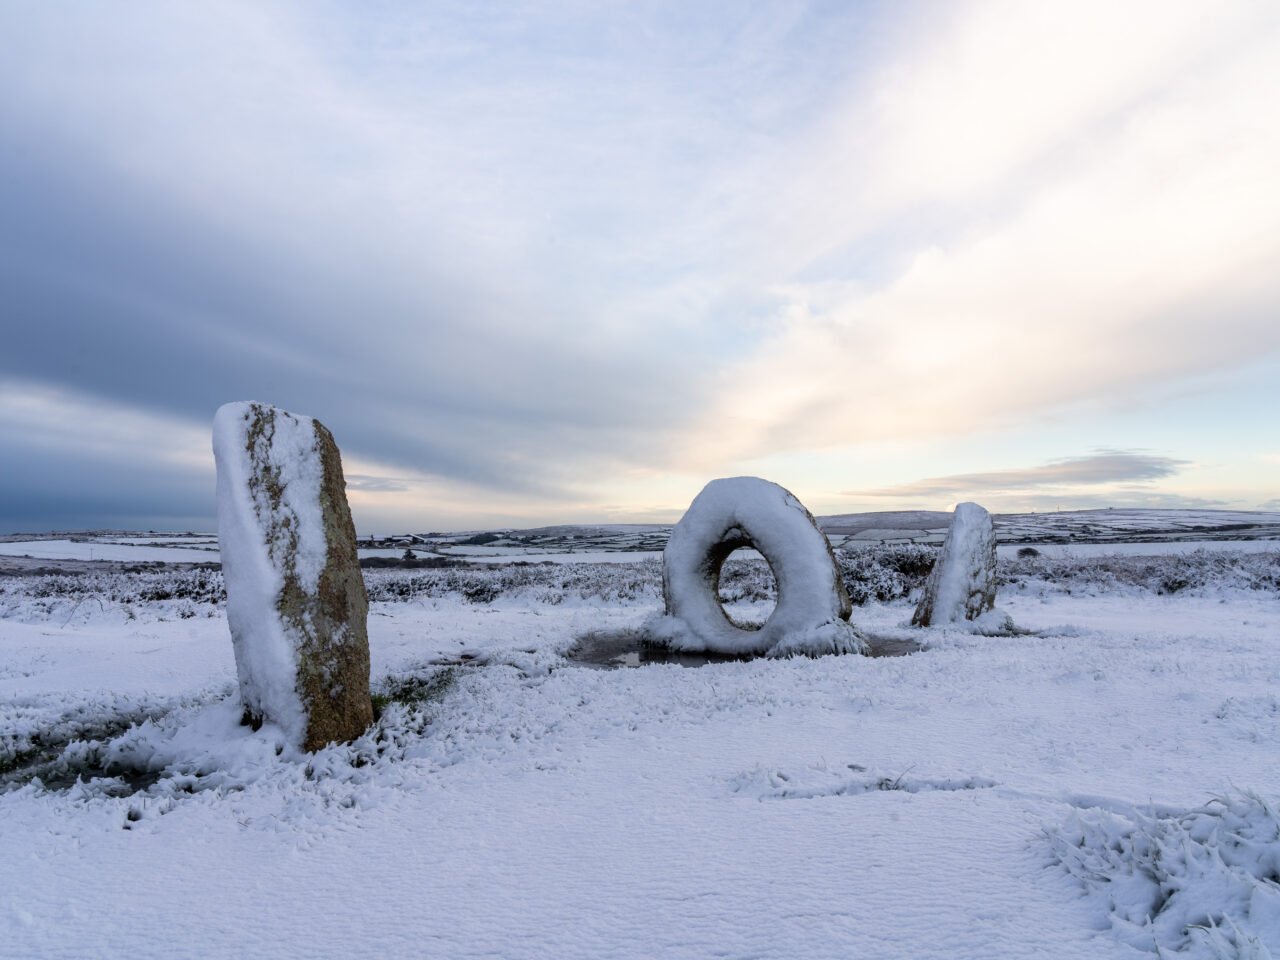 https://ejl-accounting.co.uk/wp-content/uploads/2023/03/Snow-at-Men-an-Tol-Lanyon-Quoit-and-Ding-Dong-1701230006-1280x960.jpg